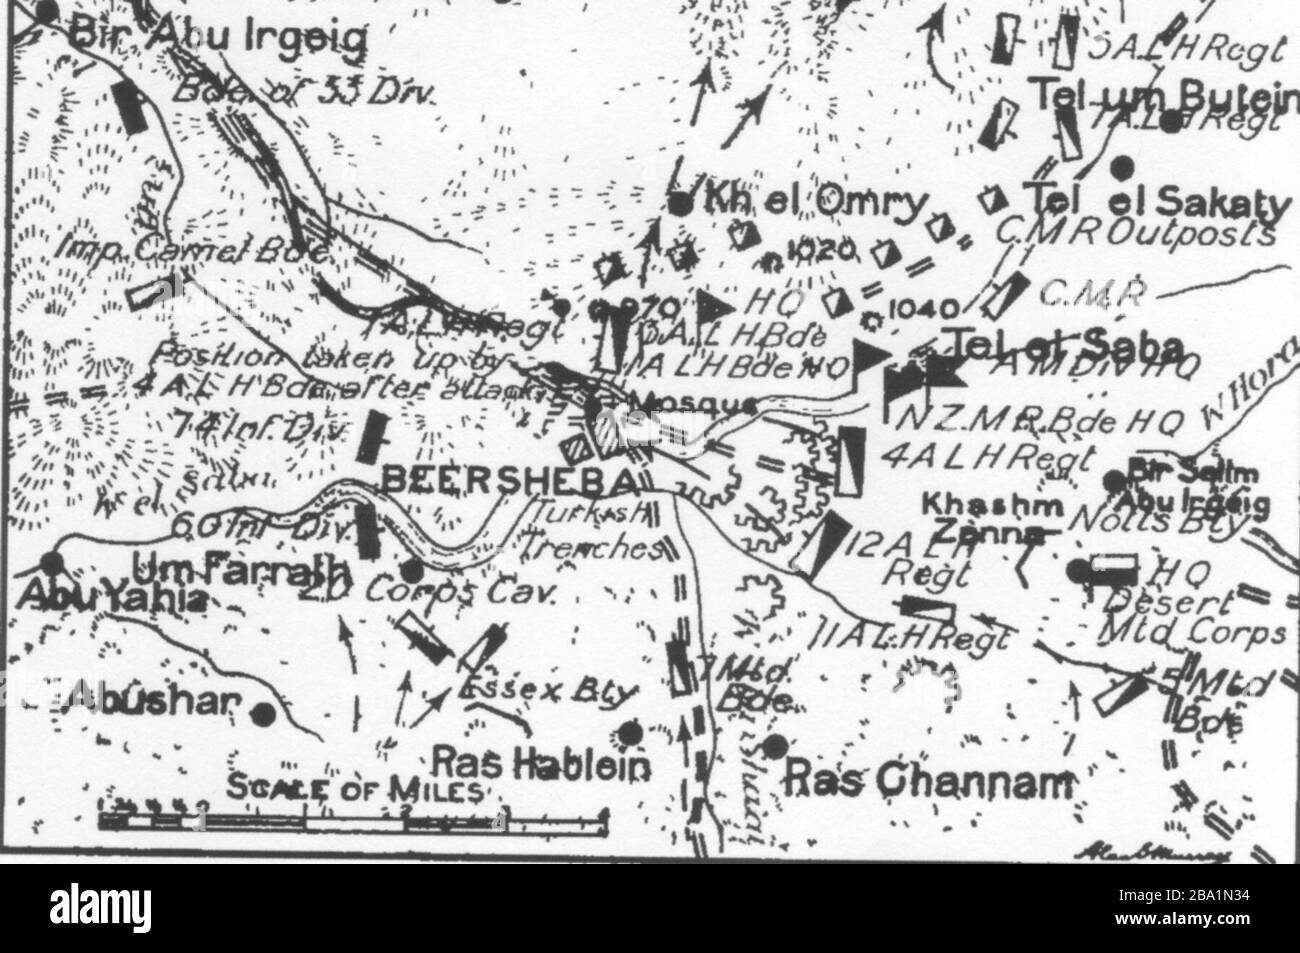 English Map Of Beersheba Position At Dusk On 31 October 1917 1941 Official History Of Australian In The War Of 19141918 Volume Vii H S Gullett 2BA1N34 